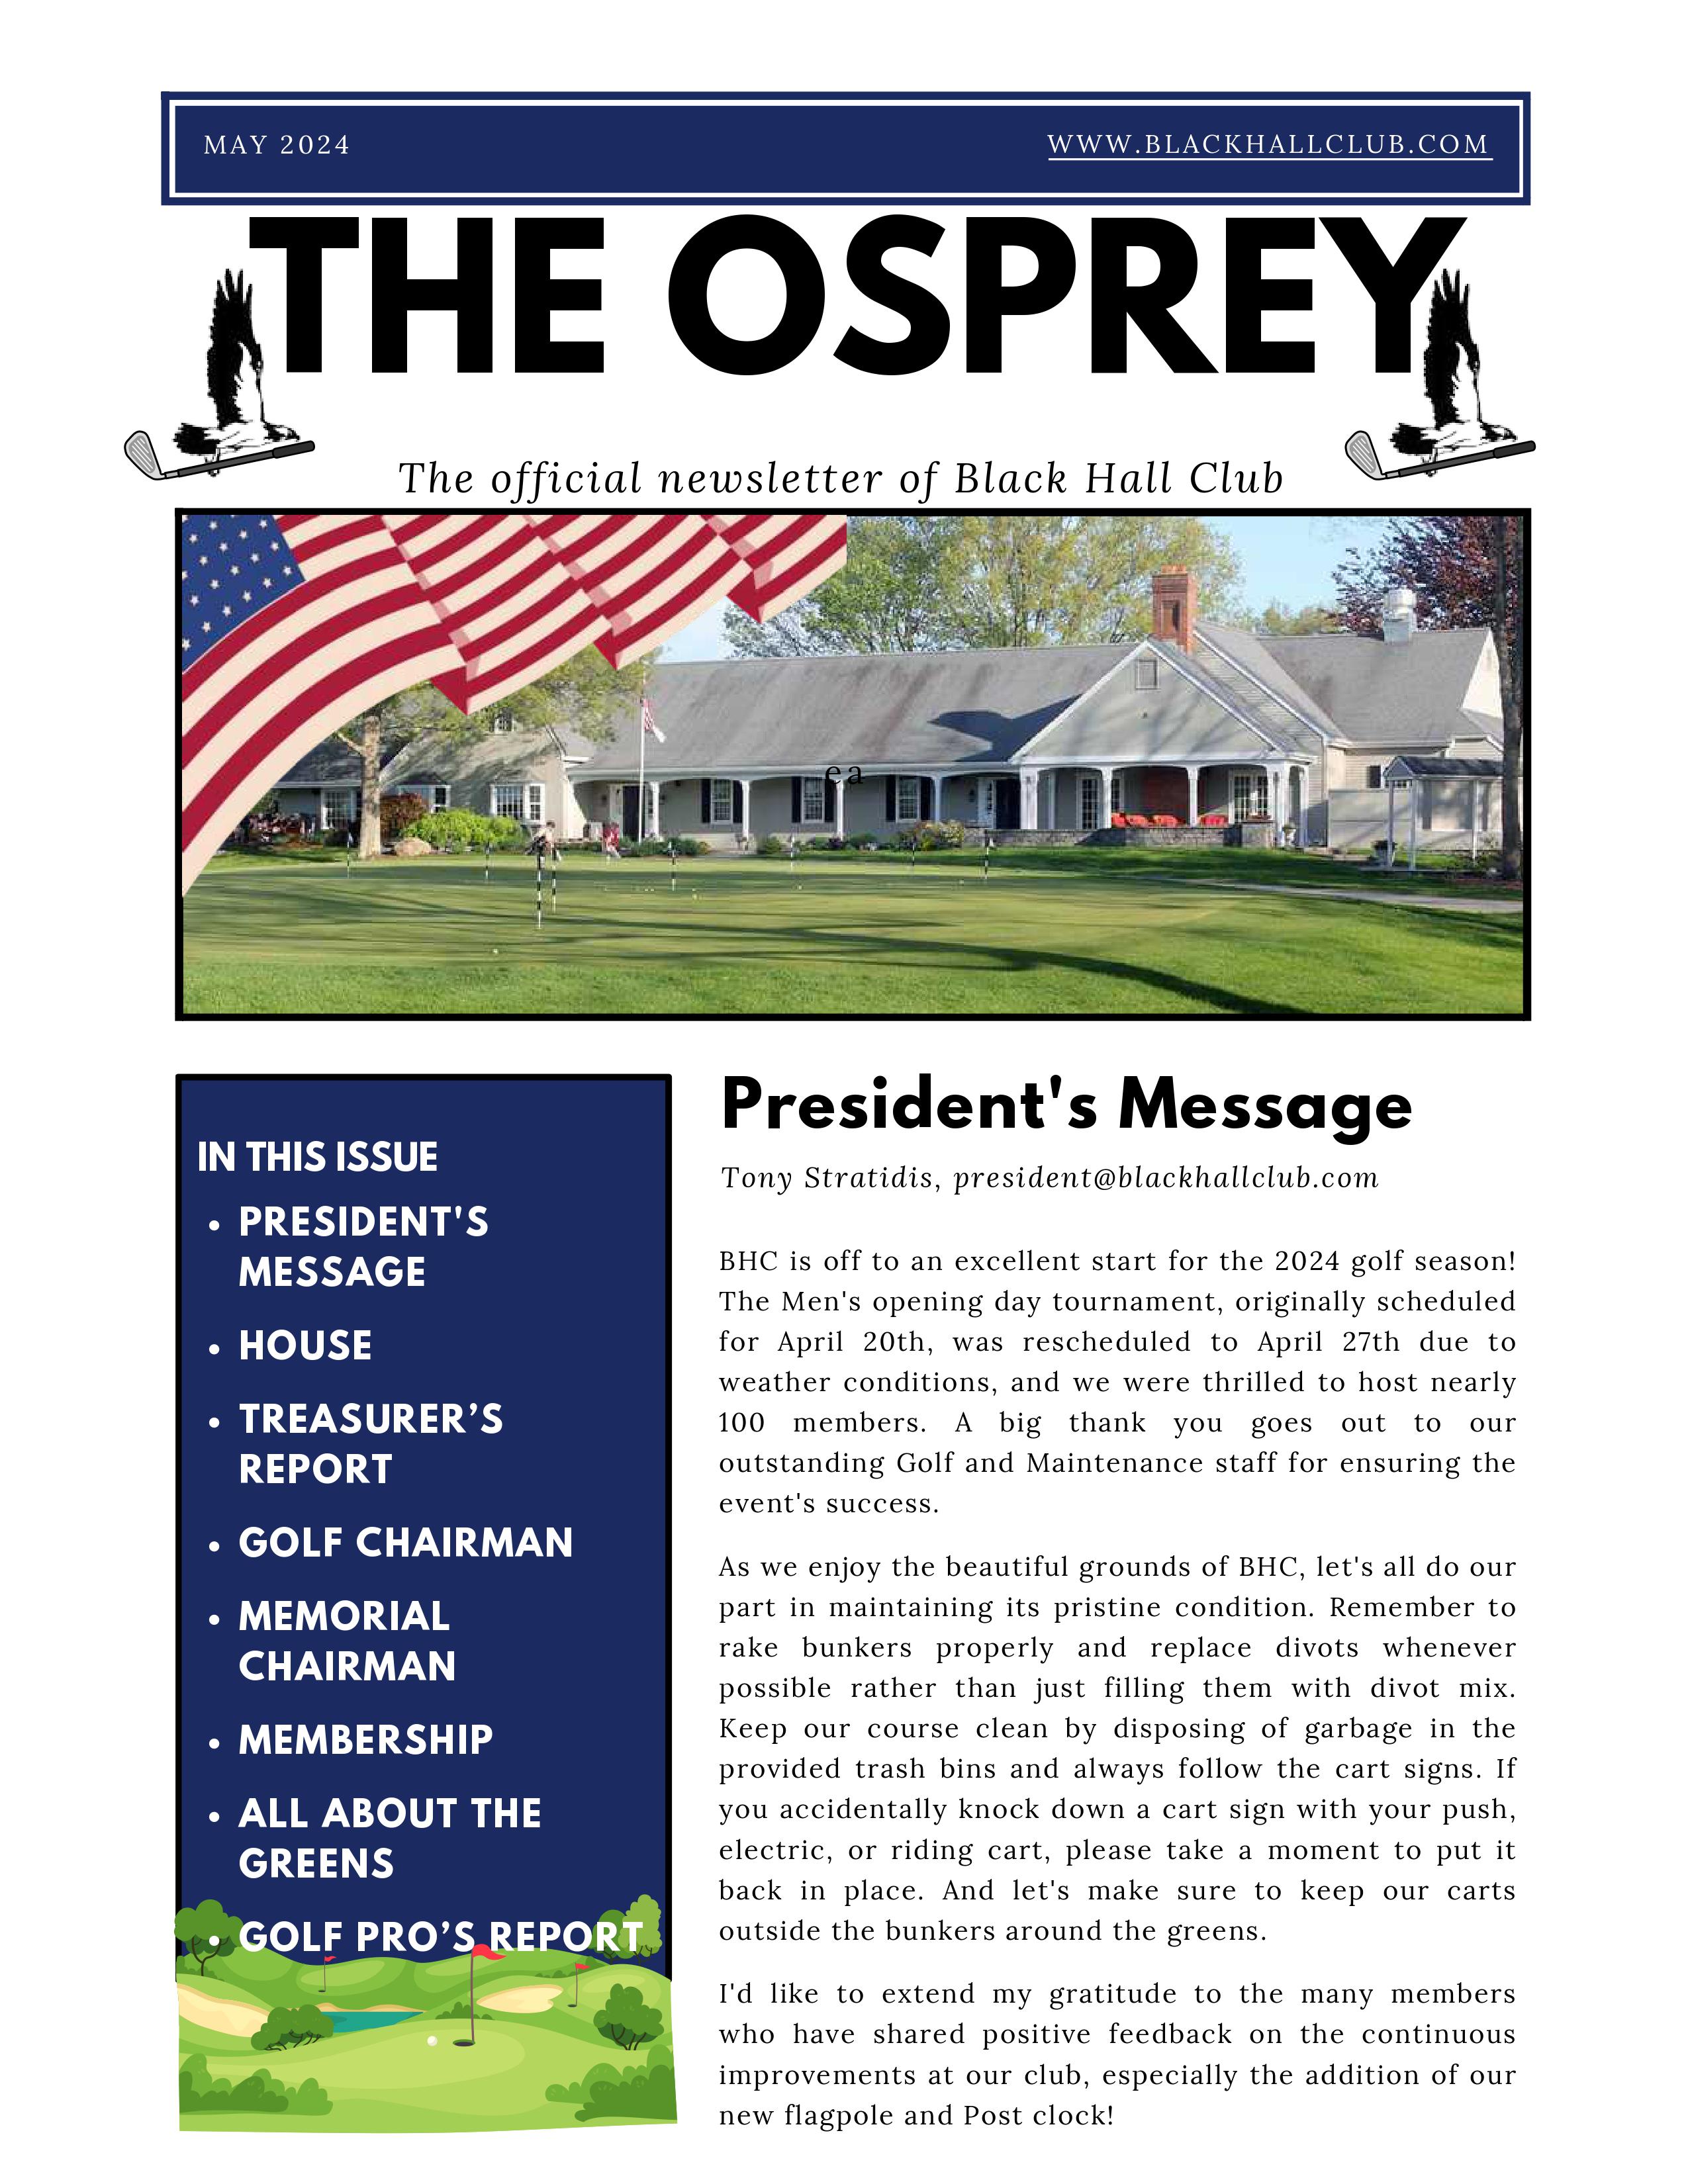 Black Hall Club | Home / The Osprey Newsletter - (May 2024) Black Hall Club Home / The Osprey Newsletter – (May 2024) BHC (May 2024) Osprey Newsletter